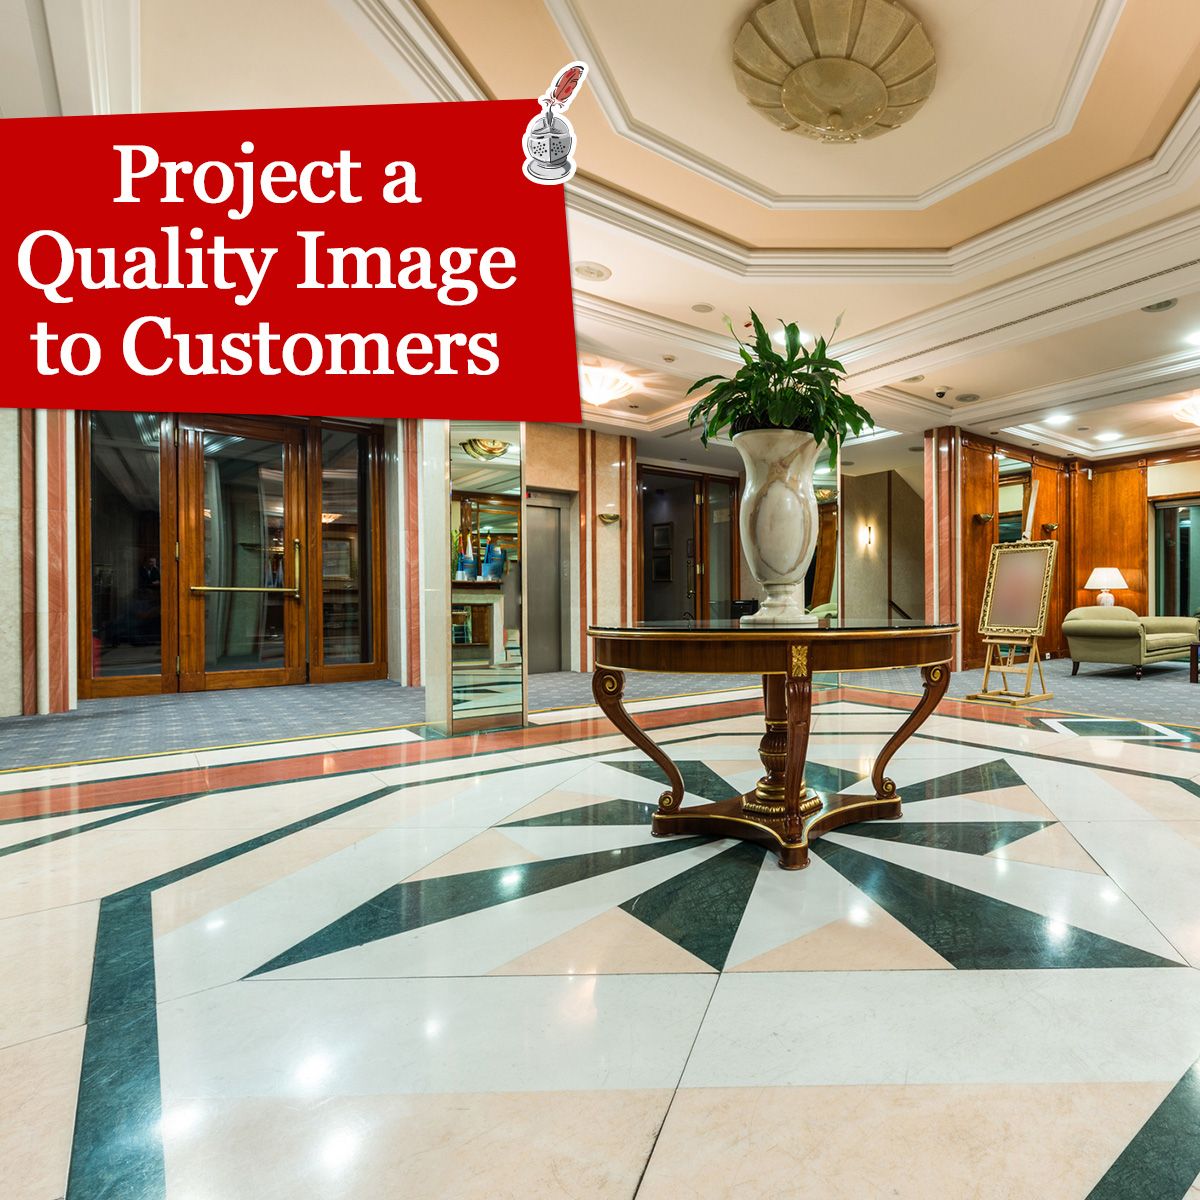 Project a Quality Image to Customers